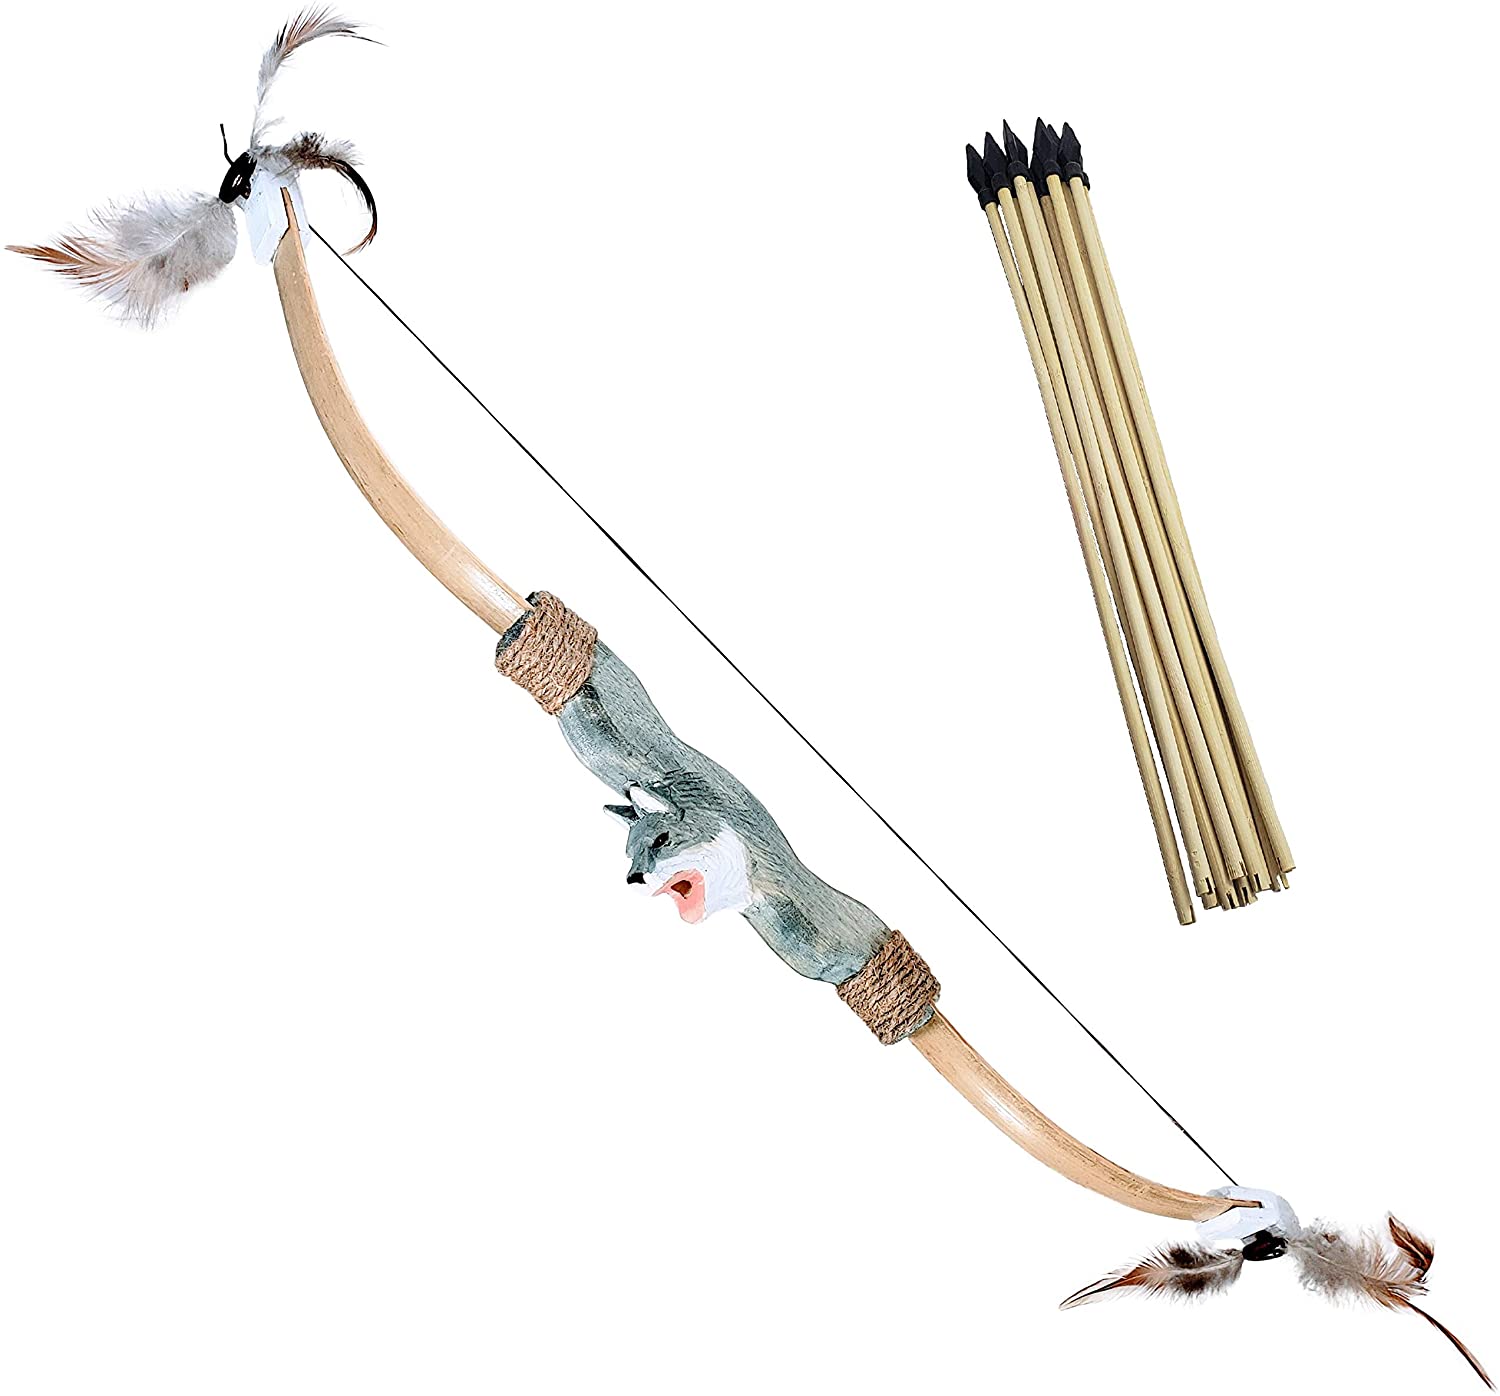 Handcarved Animal Wooden Bow and Arrow Set - 10 Wood Arrows